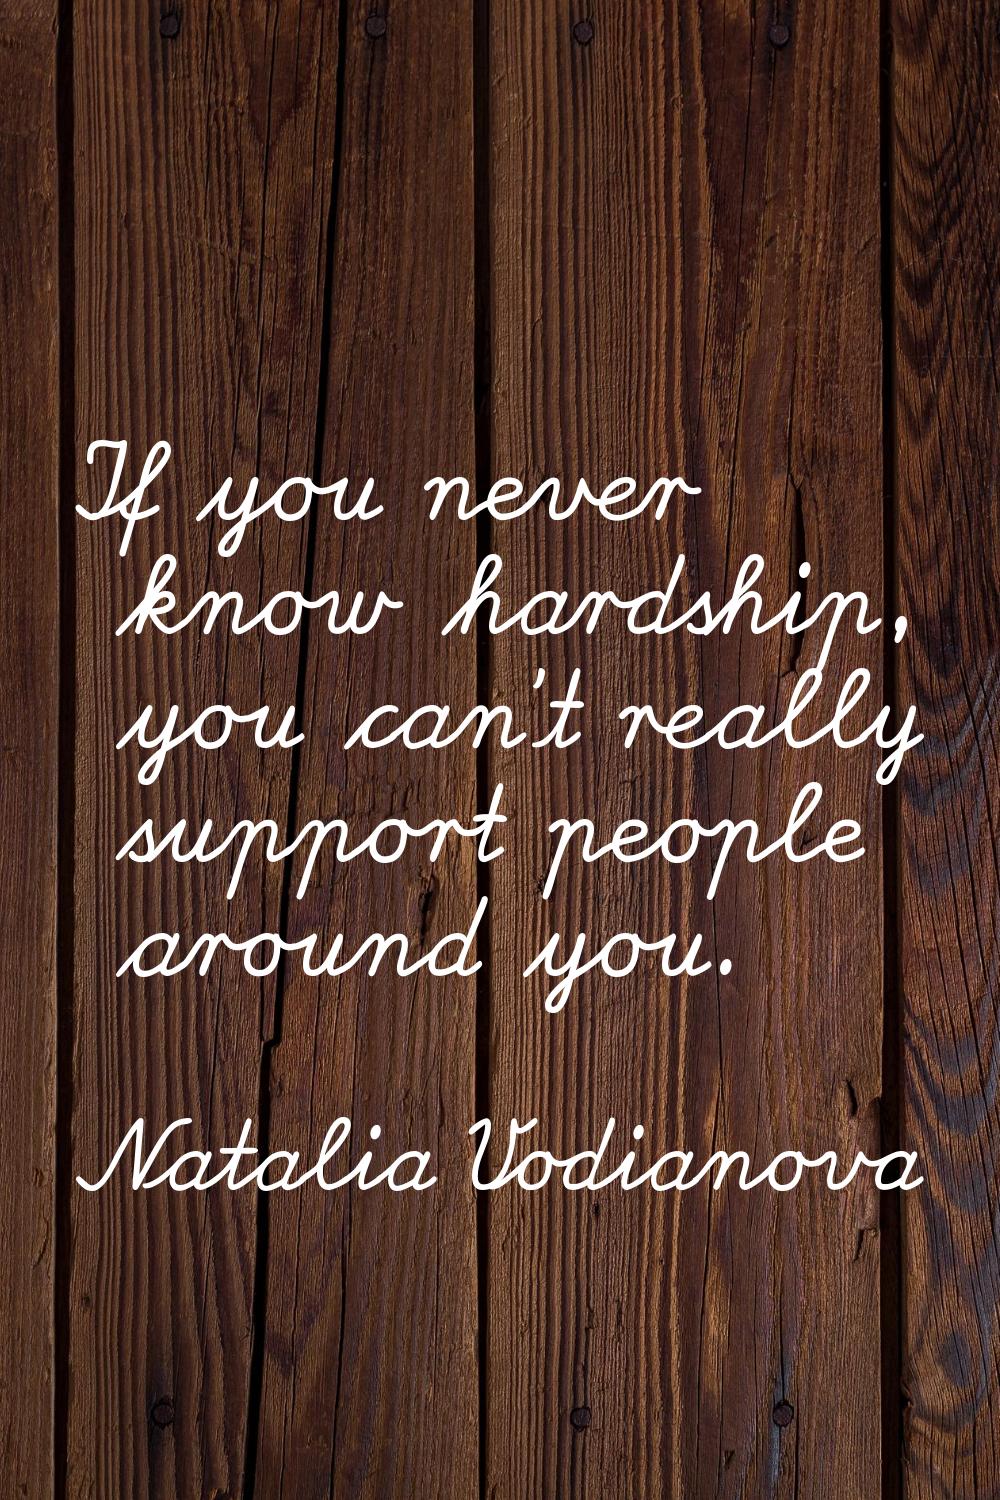 If you never know hardship, you can't really support people around you.